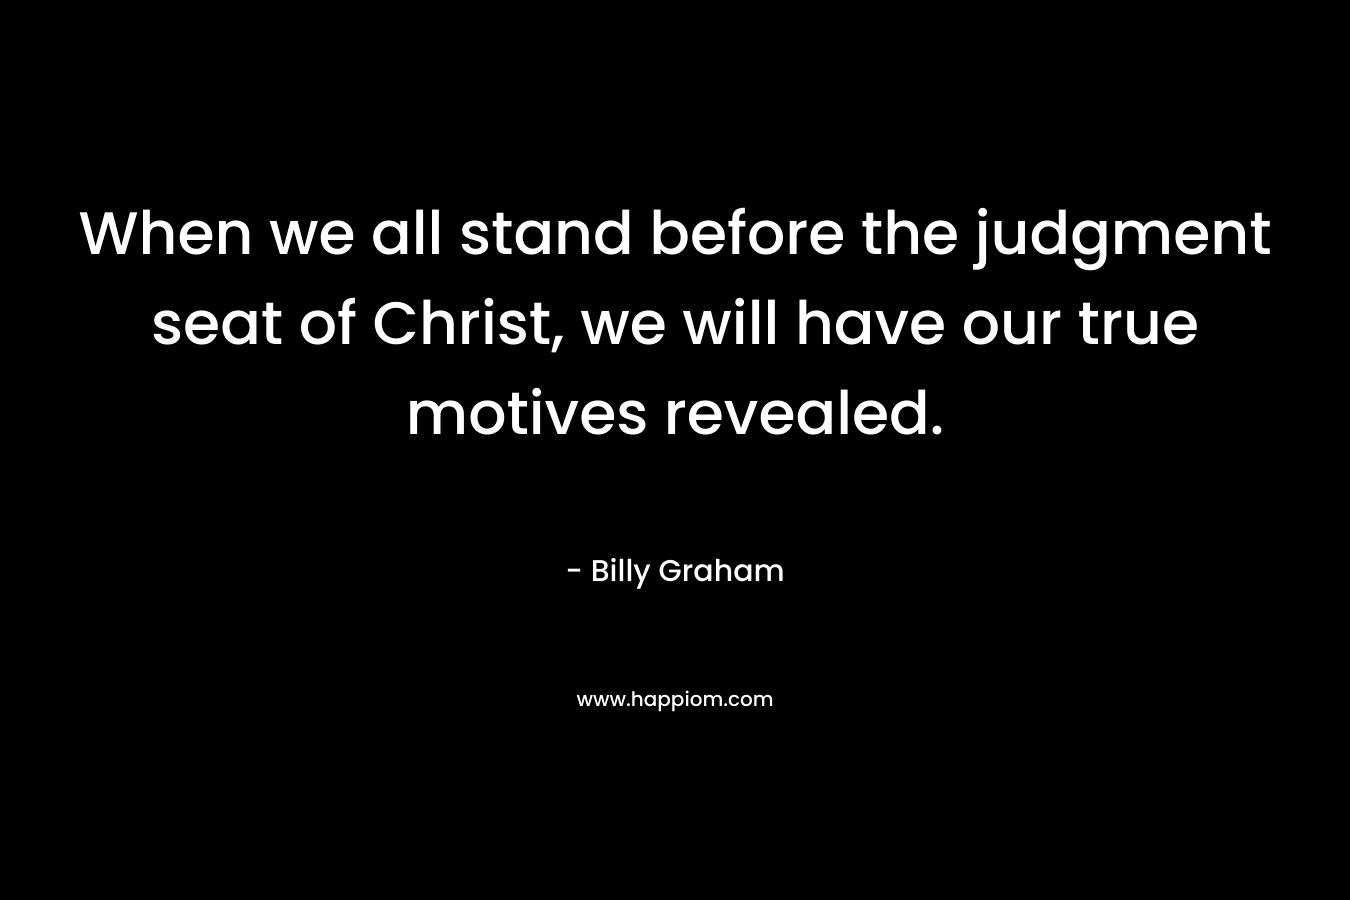 When we all stand before the judgment seat of Christ, we will have our true motives revealed. – Billy Graham